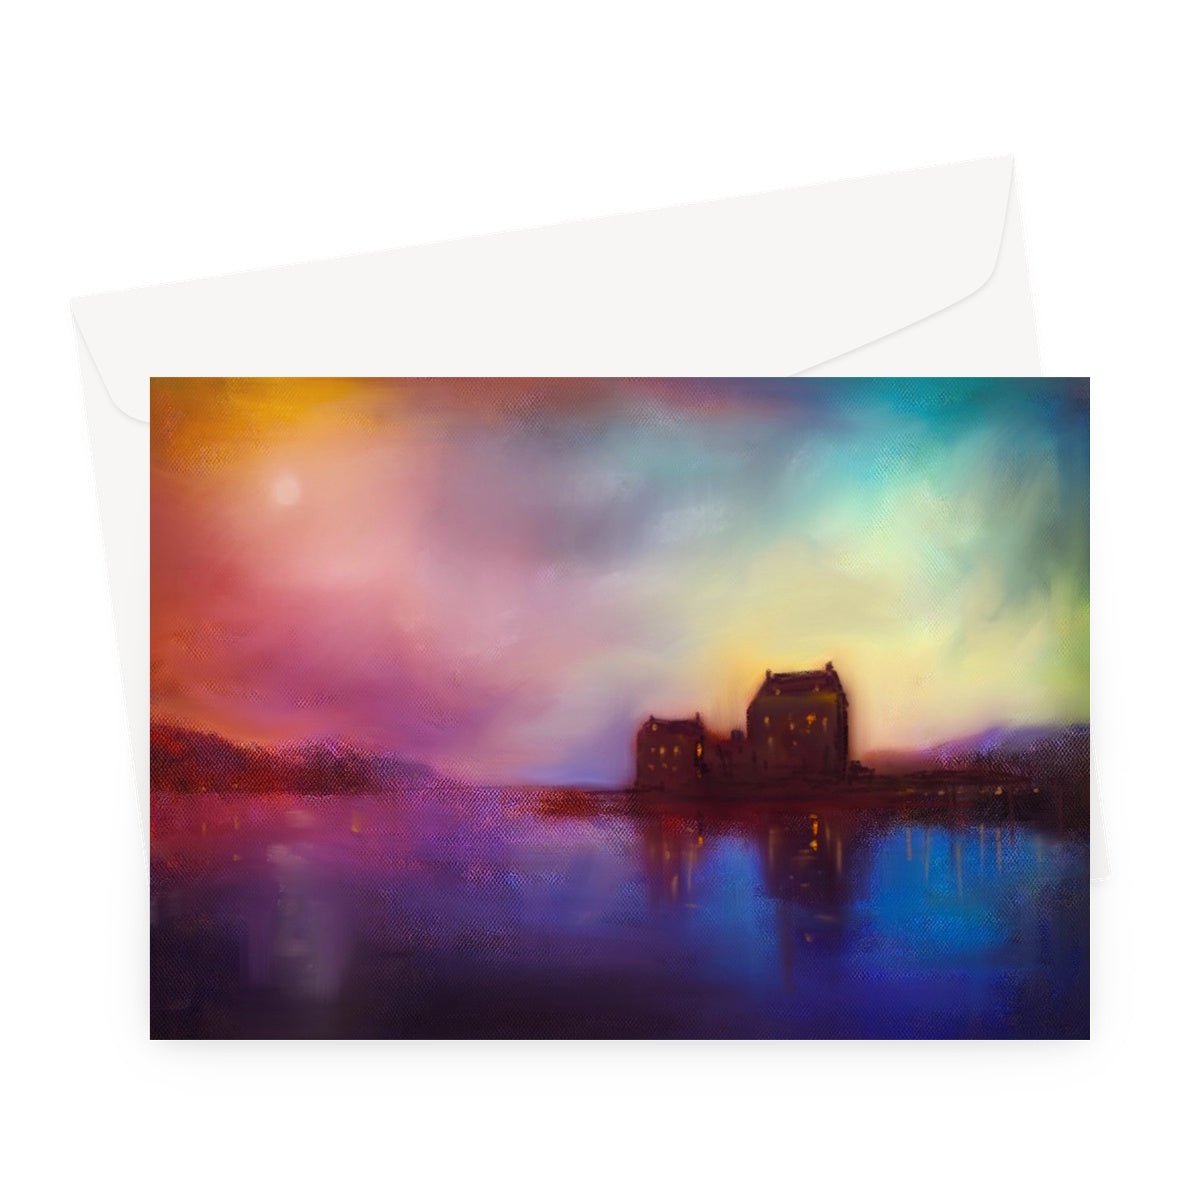 Eilean Donan Castle Sunset Art Gifts Greeting Card-Greetings Cards-Historic & Iconic Scotland Art Gallery-A5 Landscape-1 Card-Paintings, Prints, Homeware, Art Gifts From Scotland By Scottish Artist Kevin Hunter